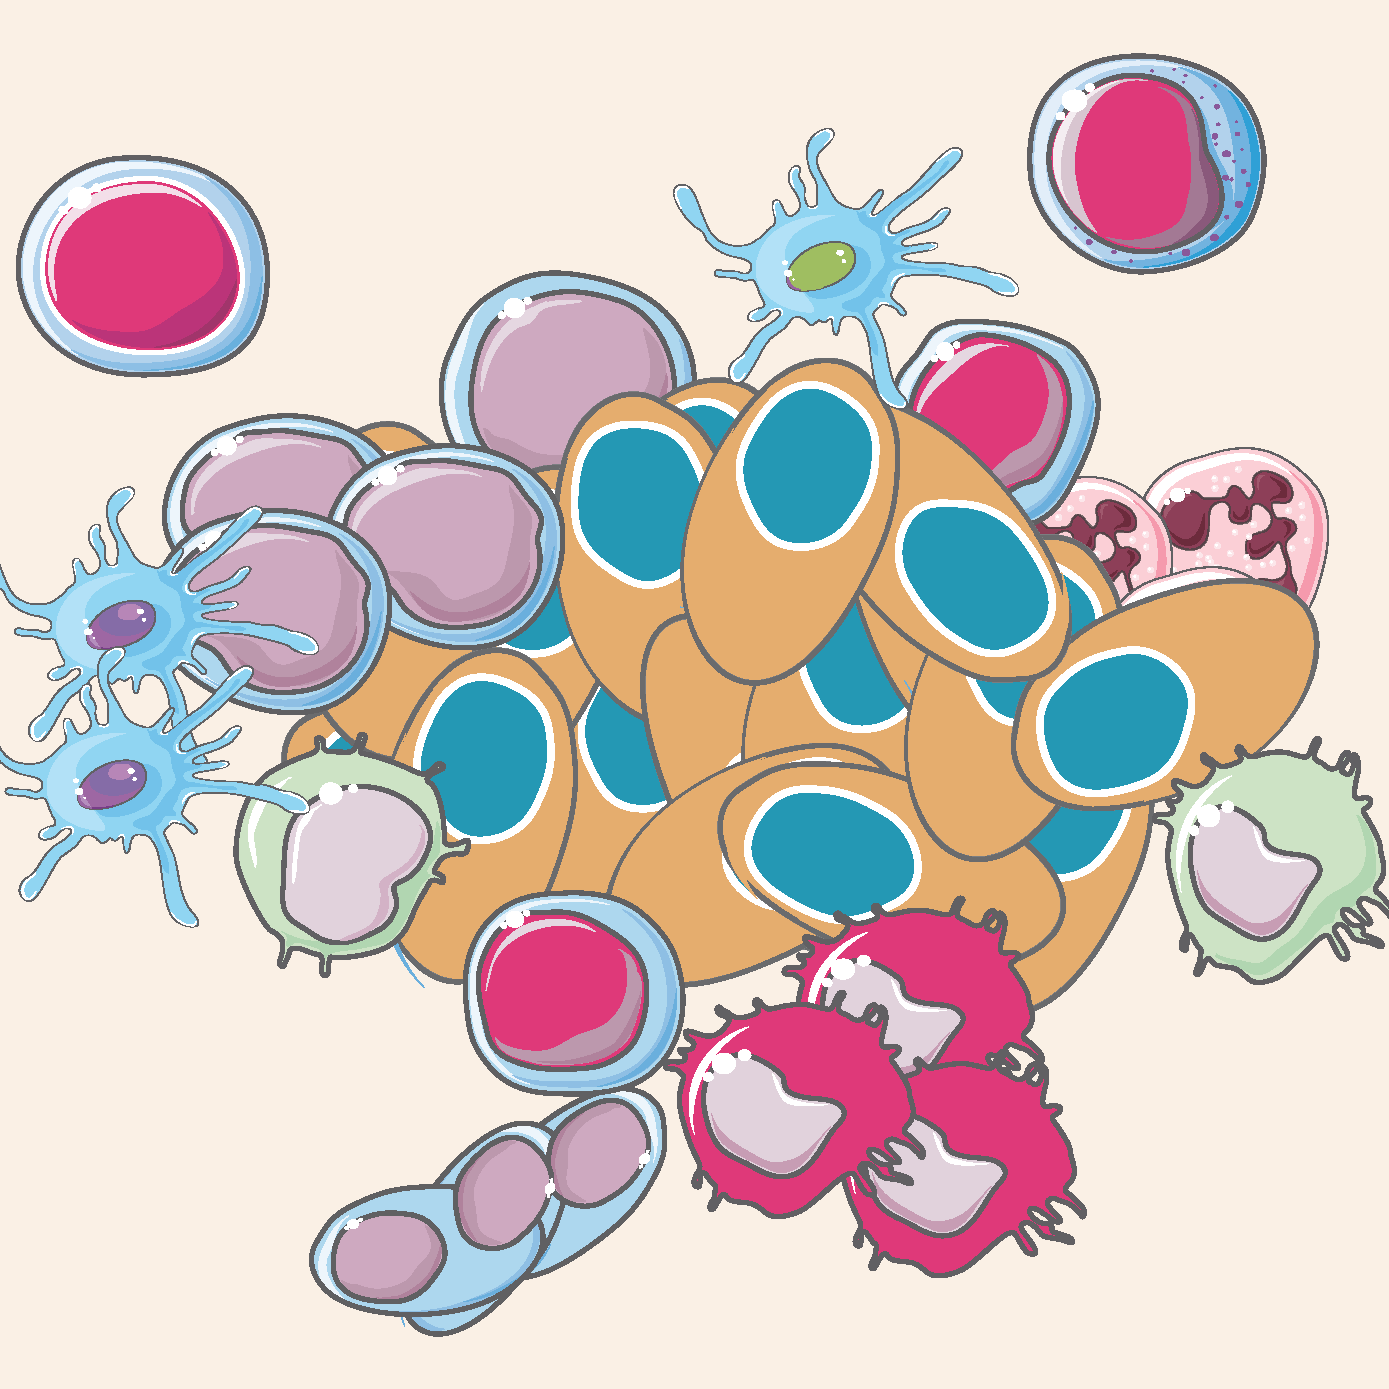 Scientists from the Champalimaud Foundation discover how multiple myeloma cells disrupts immunity 